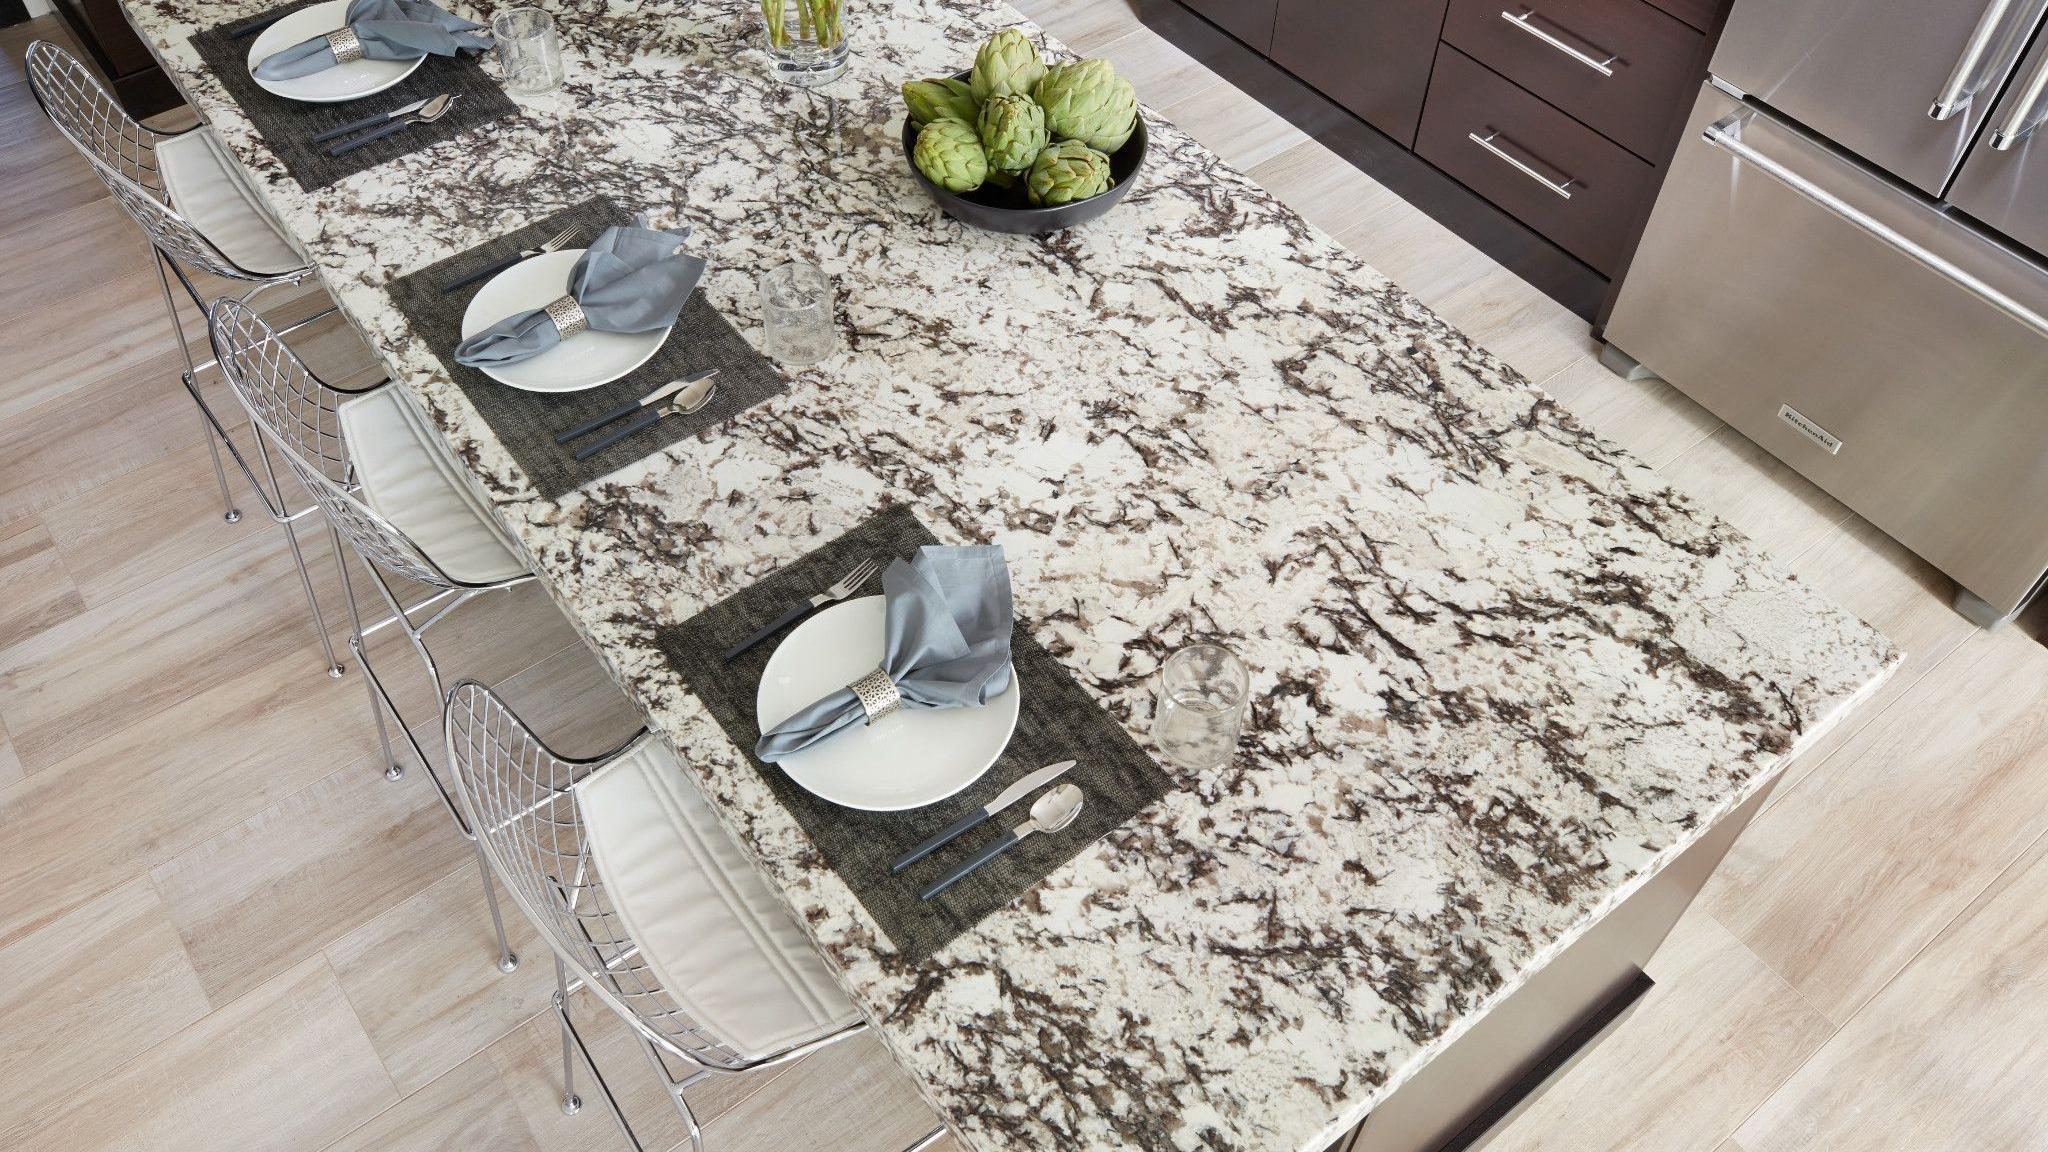 Delicatus White is quarried from a bedrock quarry in Brazil. This granite has a clean, white background with black biotite crystals, giving this stone a contemporary look.